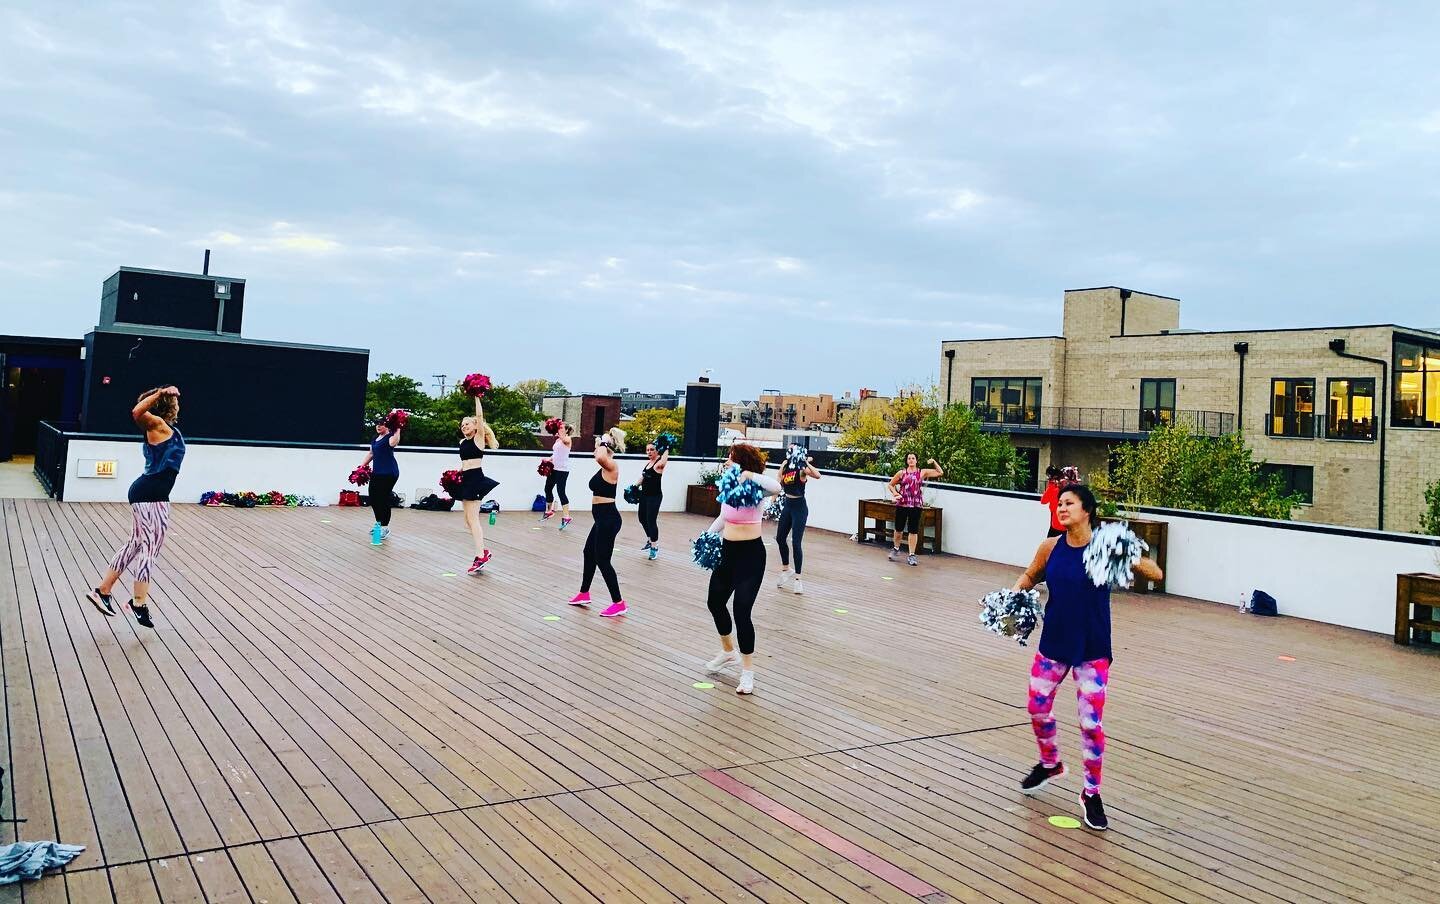 Just gonna keep posting pics of our rooftop time together ❤️❤️❤️ We had to postpone our last Sunday class due to rain and now have a couple slots open for next week... can you come? Message us and we&rsquo;ll send you the link! #chicagooutdoorfitness